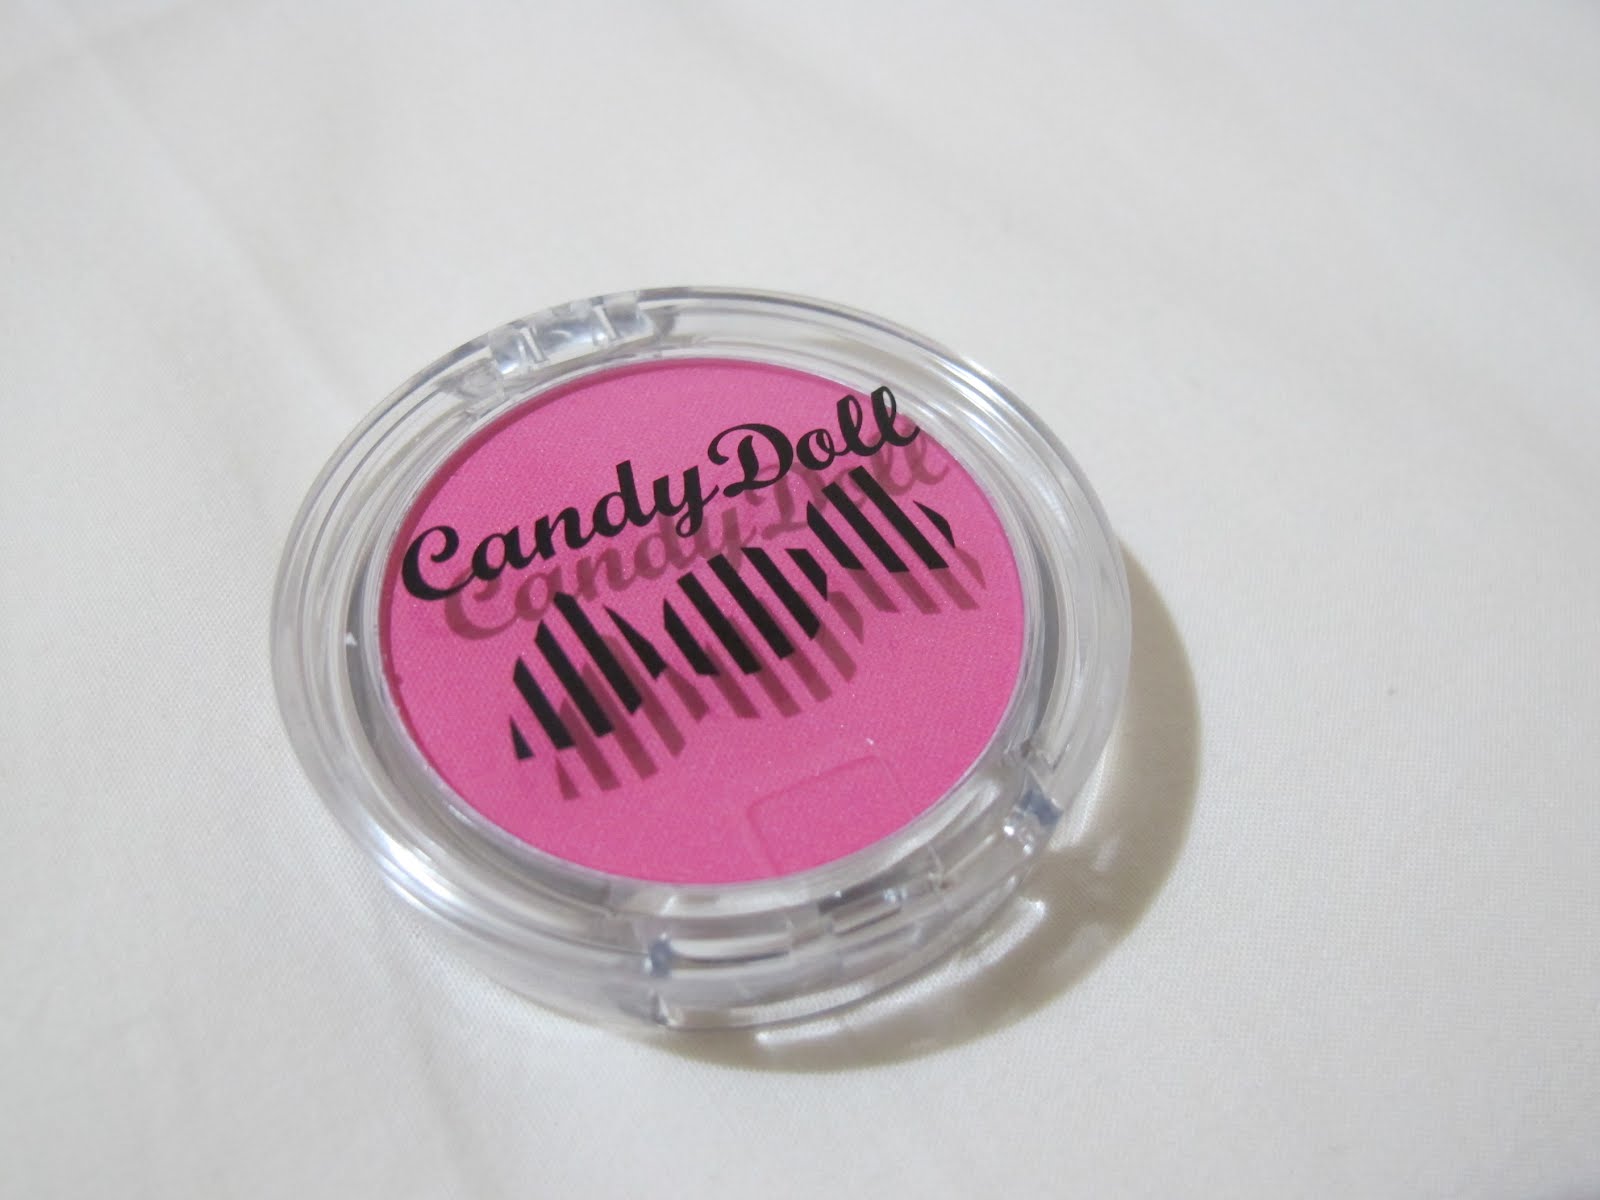 Qiqiland Review Candy Doll Blush In Strawberry Pink